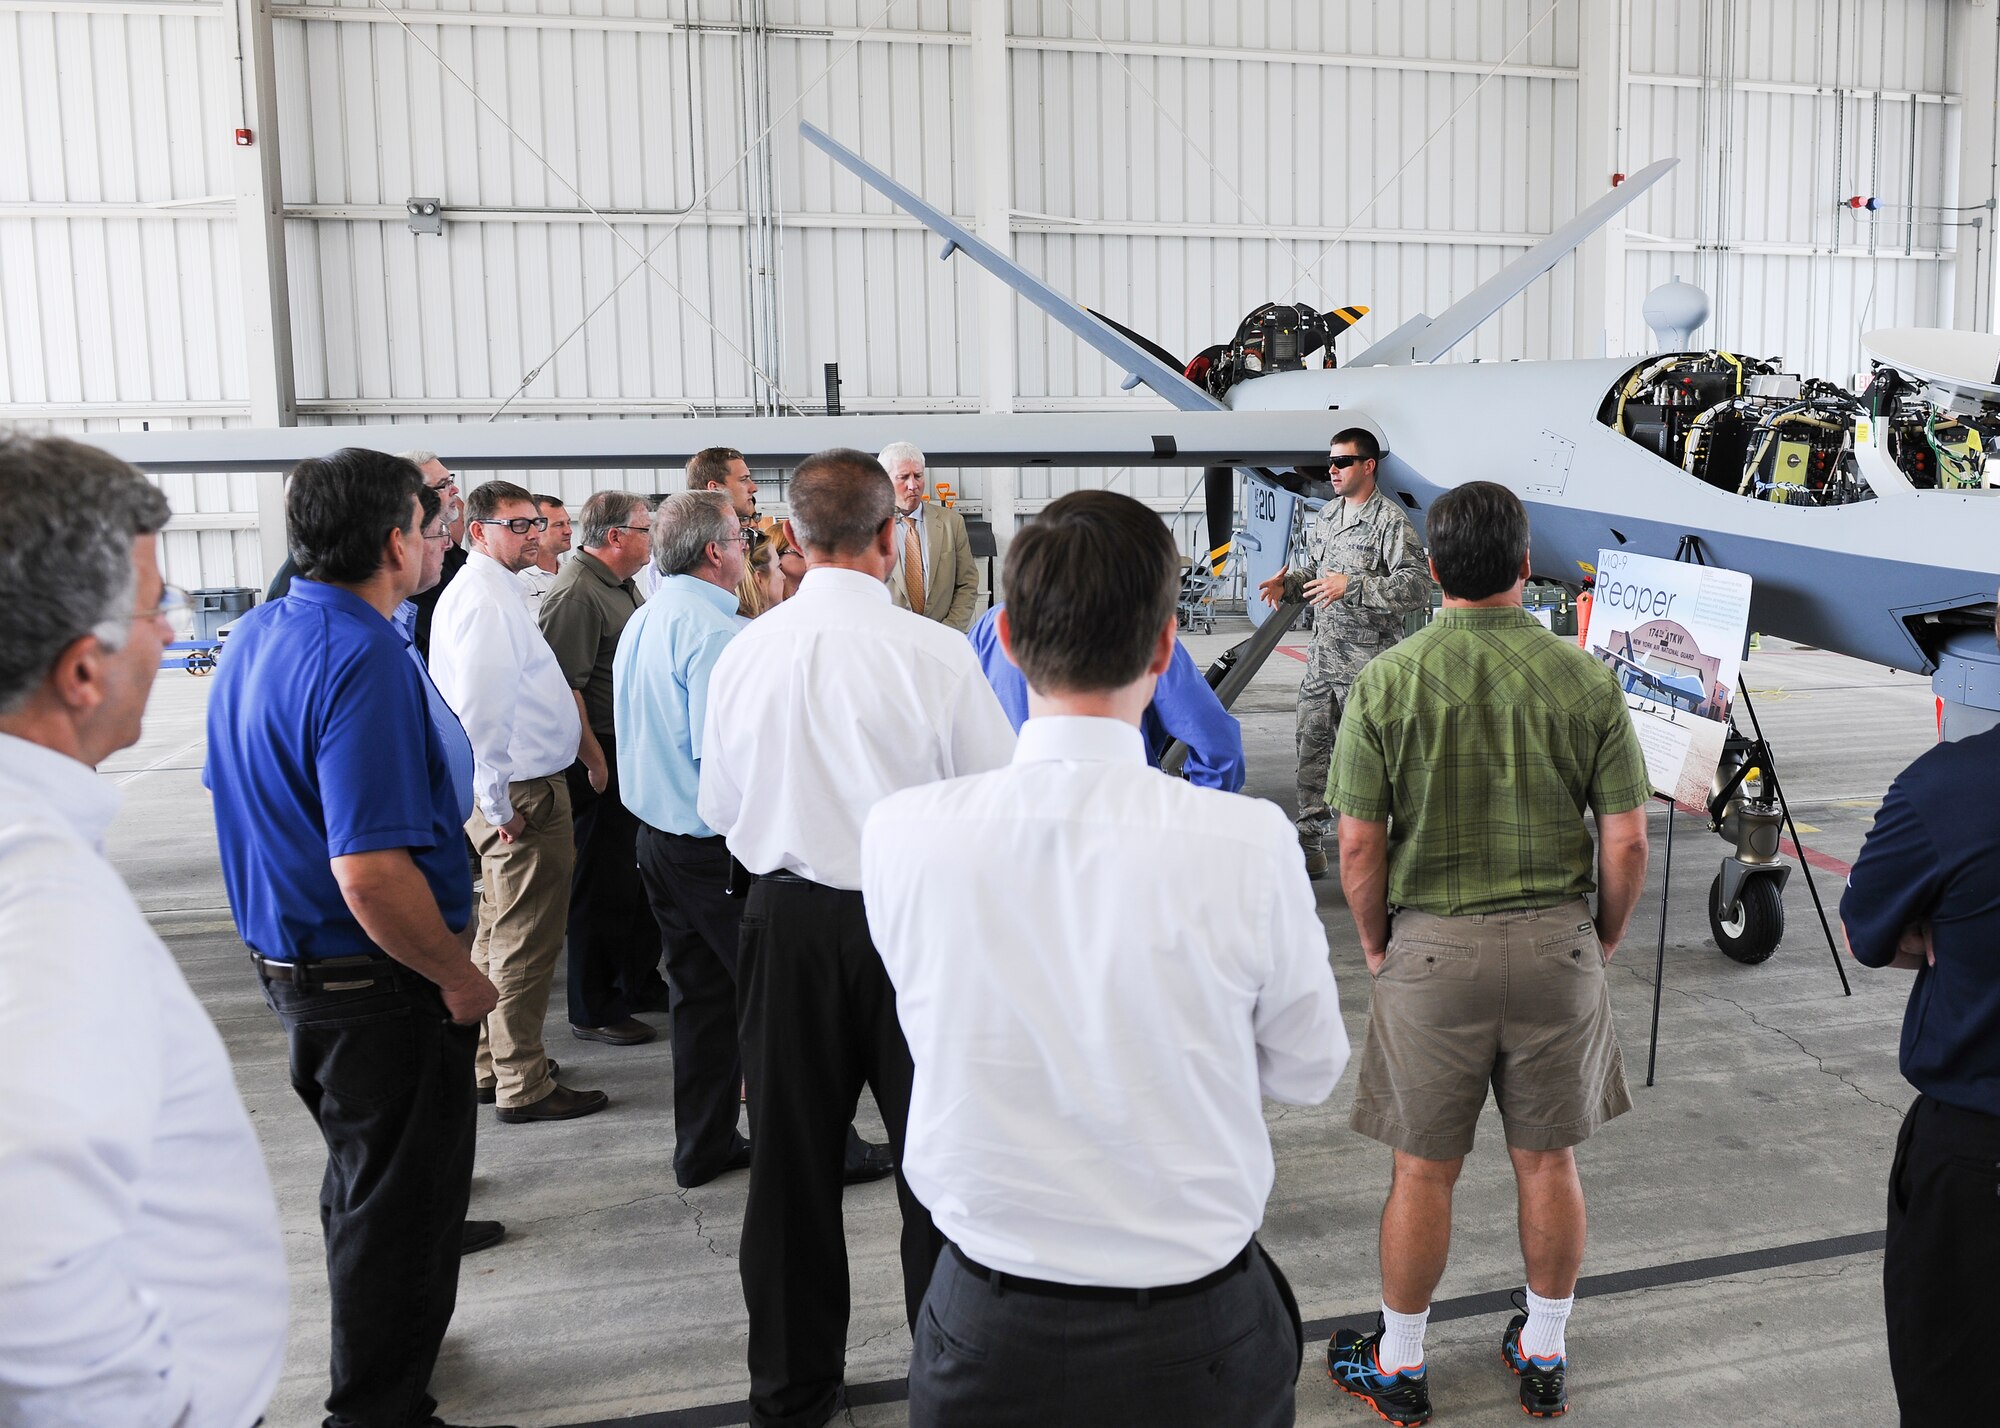 Local employers receive a briefing on the MQ-9 Remotely Piloted Aircraft, during an Employer Support of the Guard and Reserve (ESGR) Boss Day event on Hancock Field, Thursday, August 18. ESGR is a Department of Defense program established in 1972 to encourage cooperation between Reserve Component Service members and their employers. Boss Day events allow employers to see what their employees take part in as part of their military commitment. (U.S. Air National Guard photo by Tech. Sgt. Jeremy M. Call/Released)